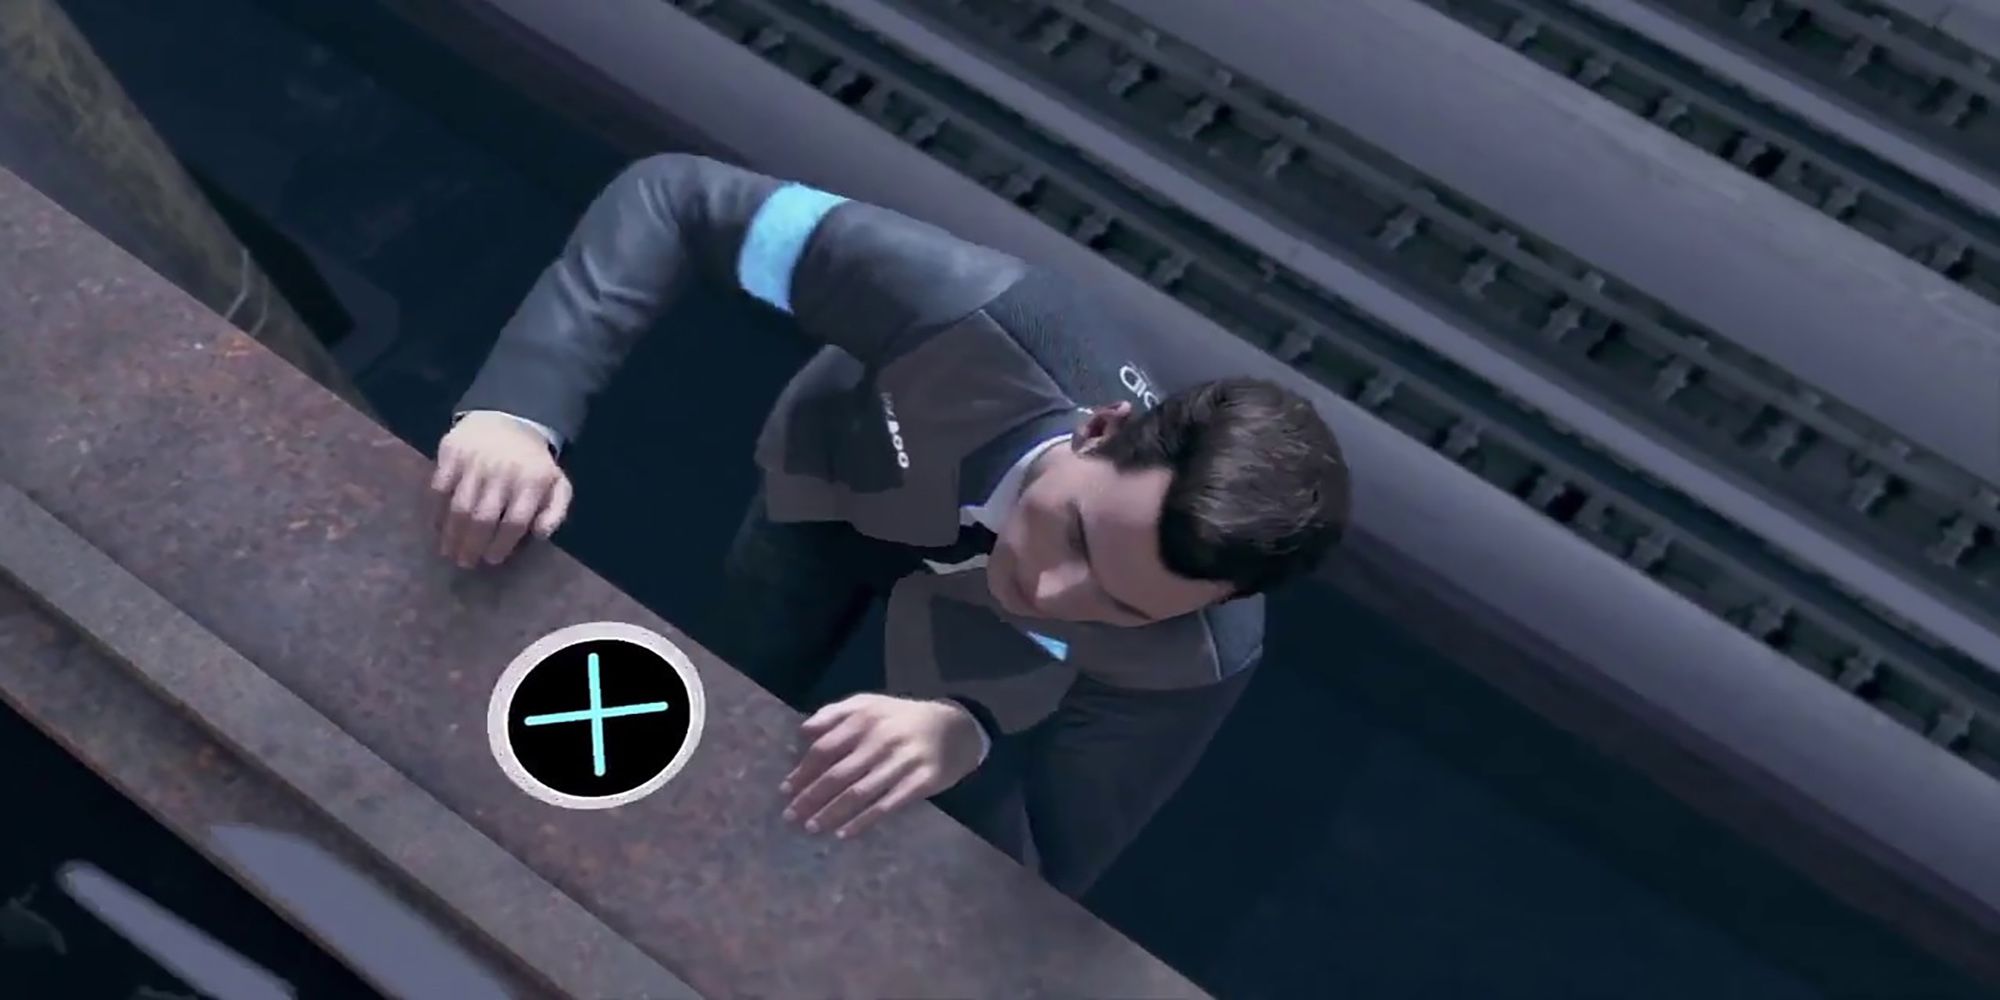 Connor hangs on to the ledge of a building in this QTE from Detroit Become Human.